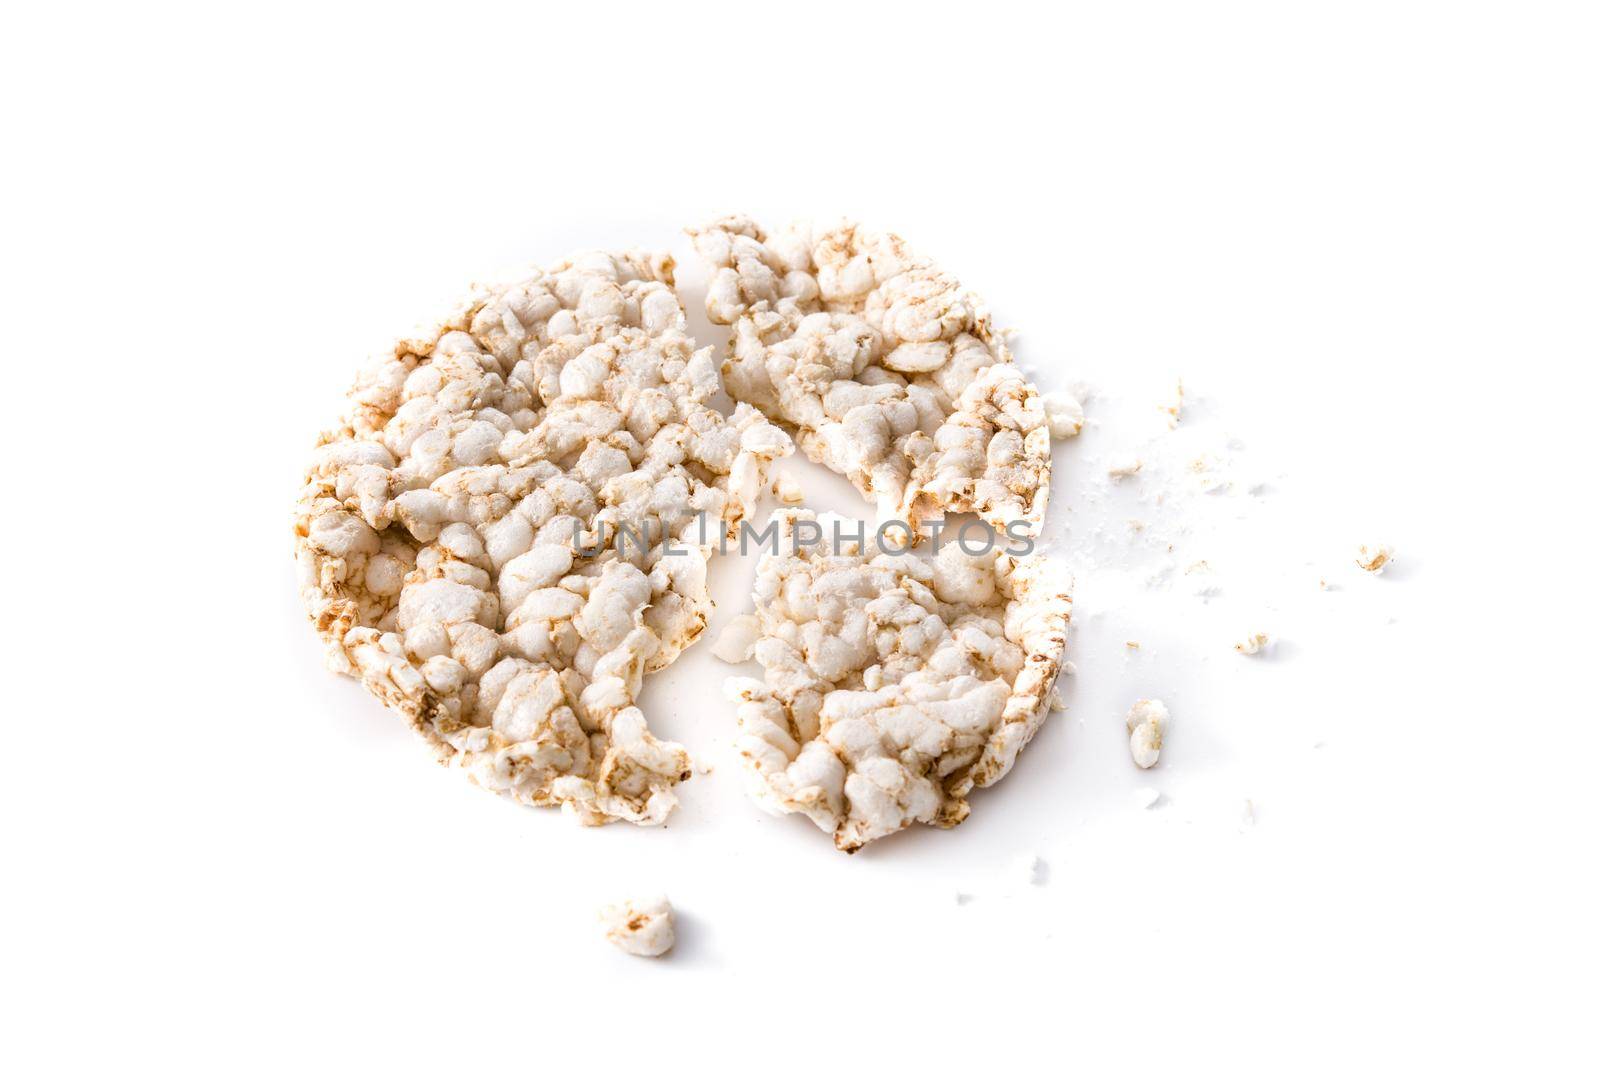 Pile of puffed rice cake isolated on white background